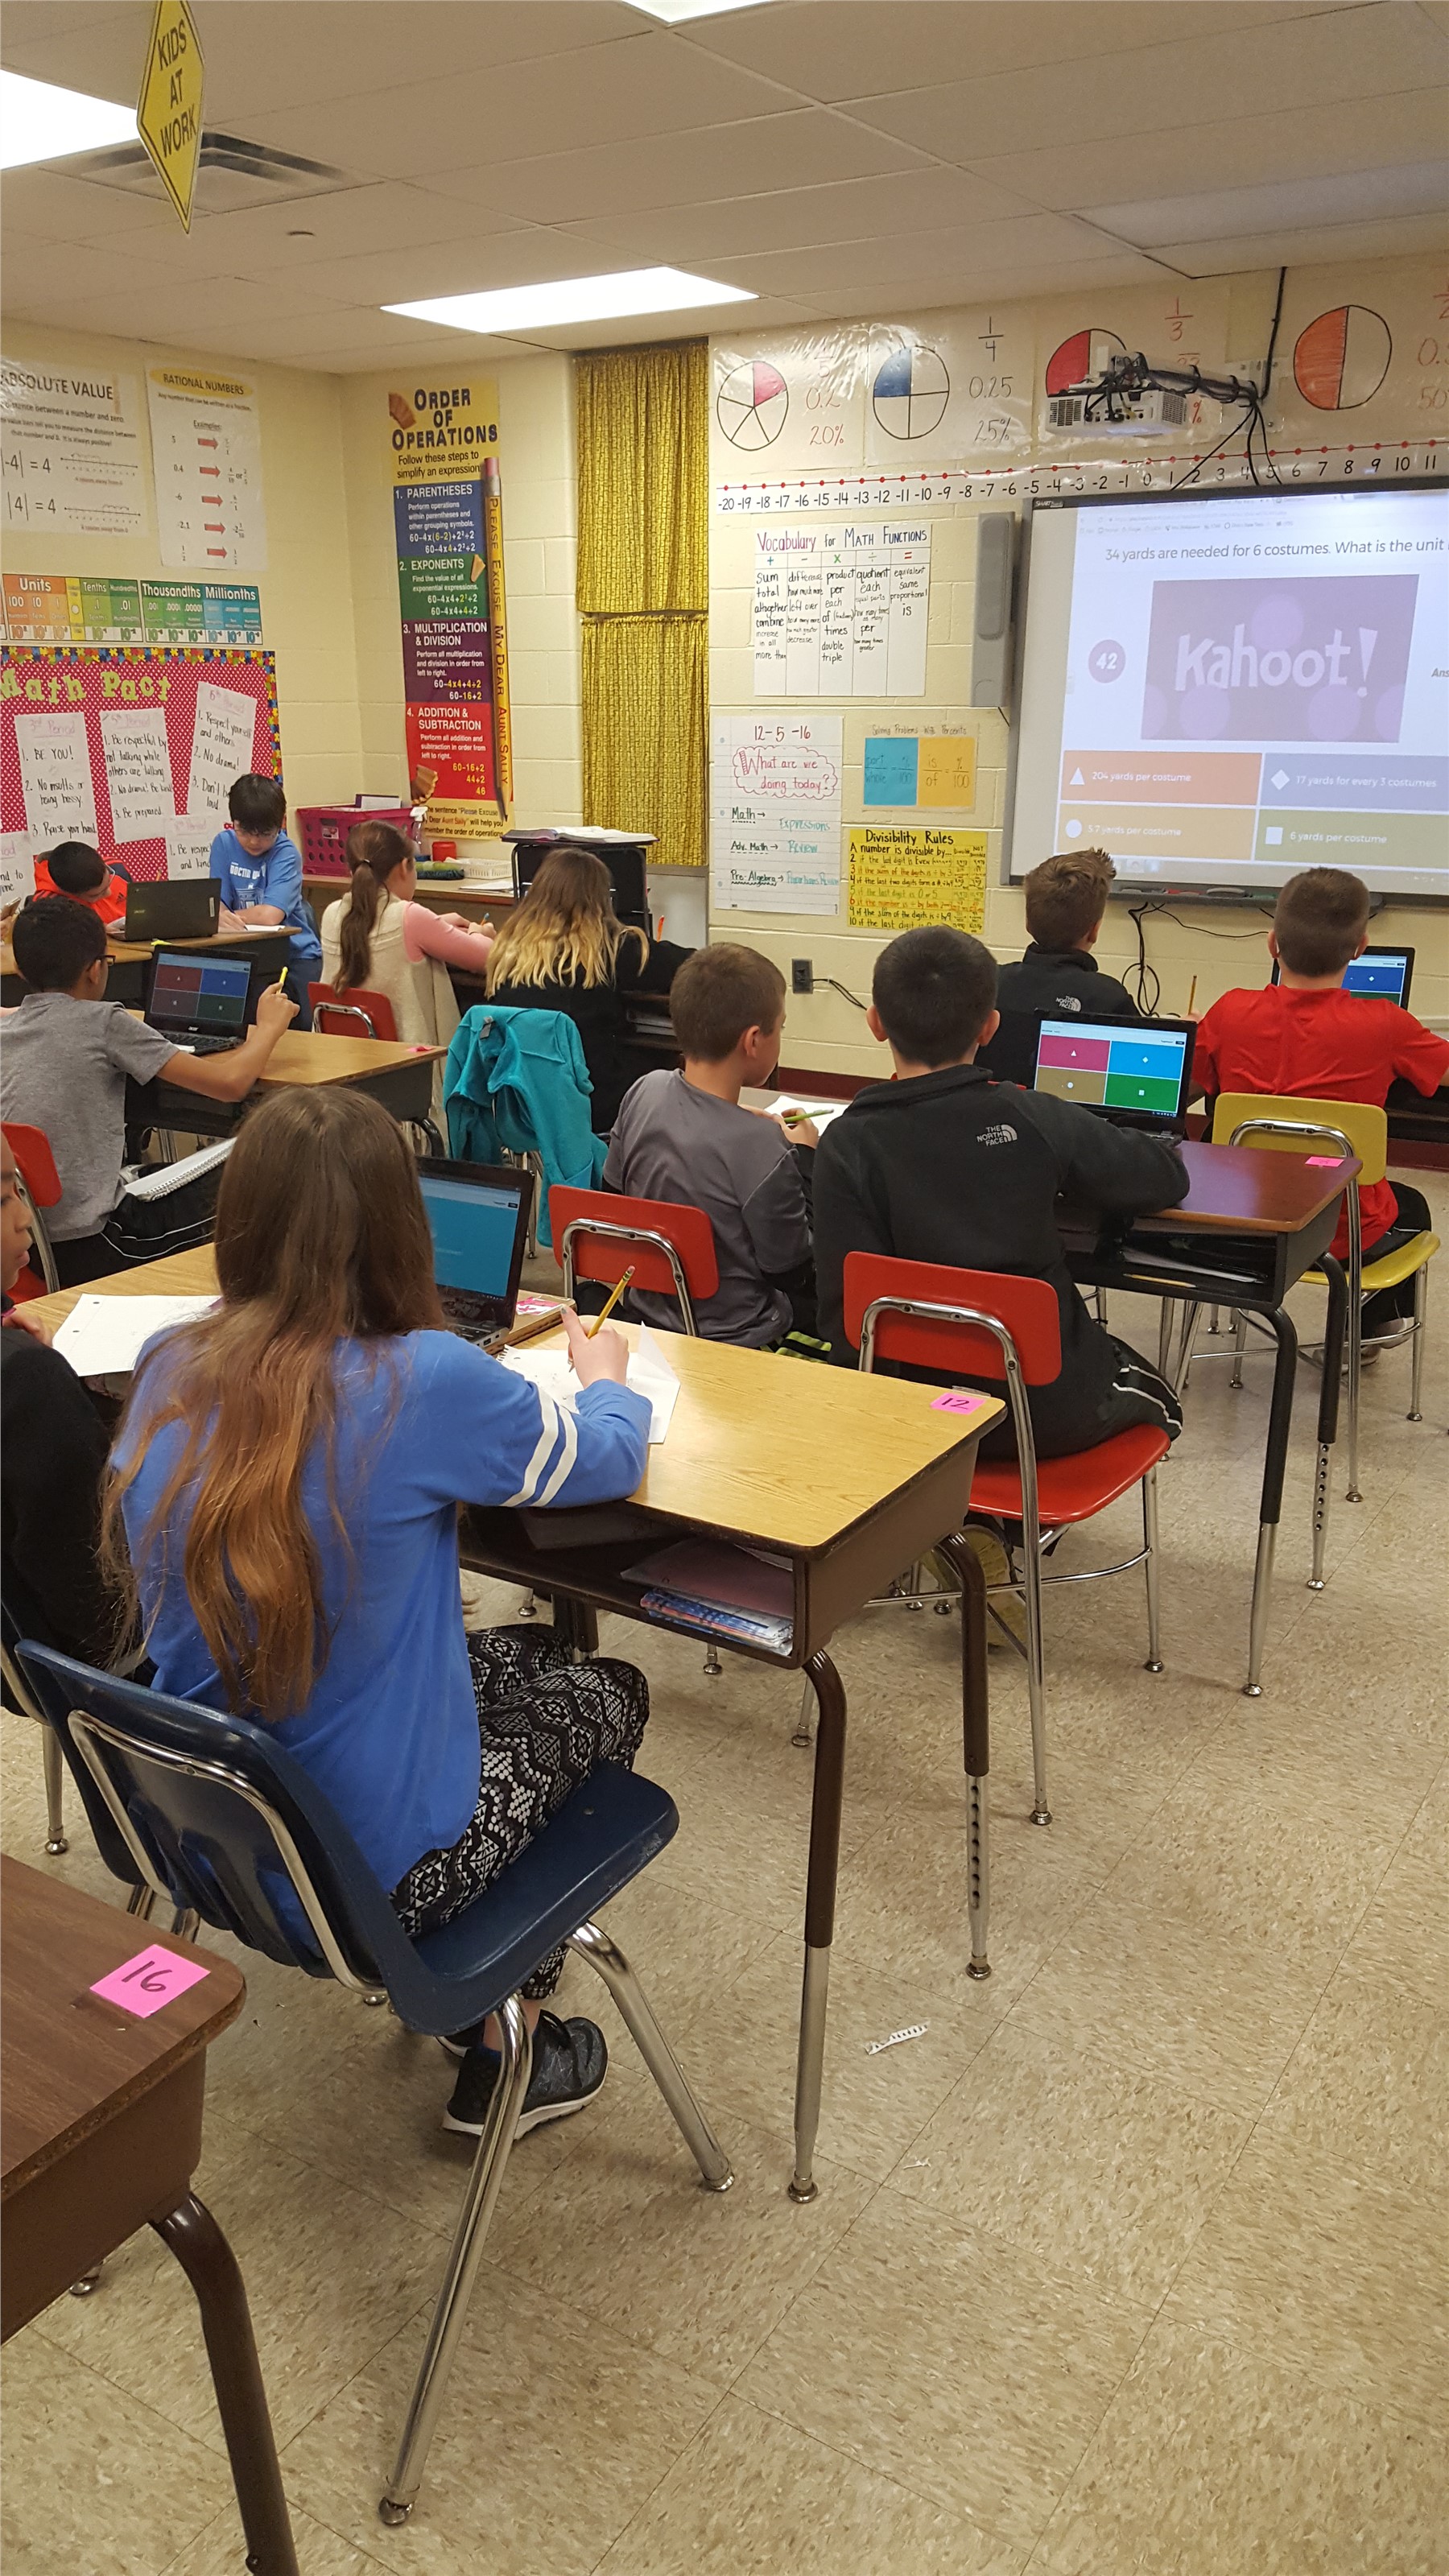 Students play "Kahoot!" to review.